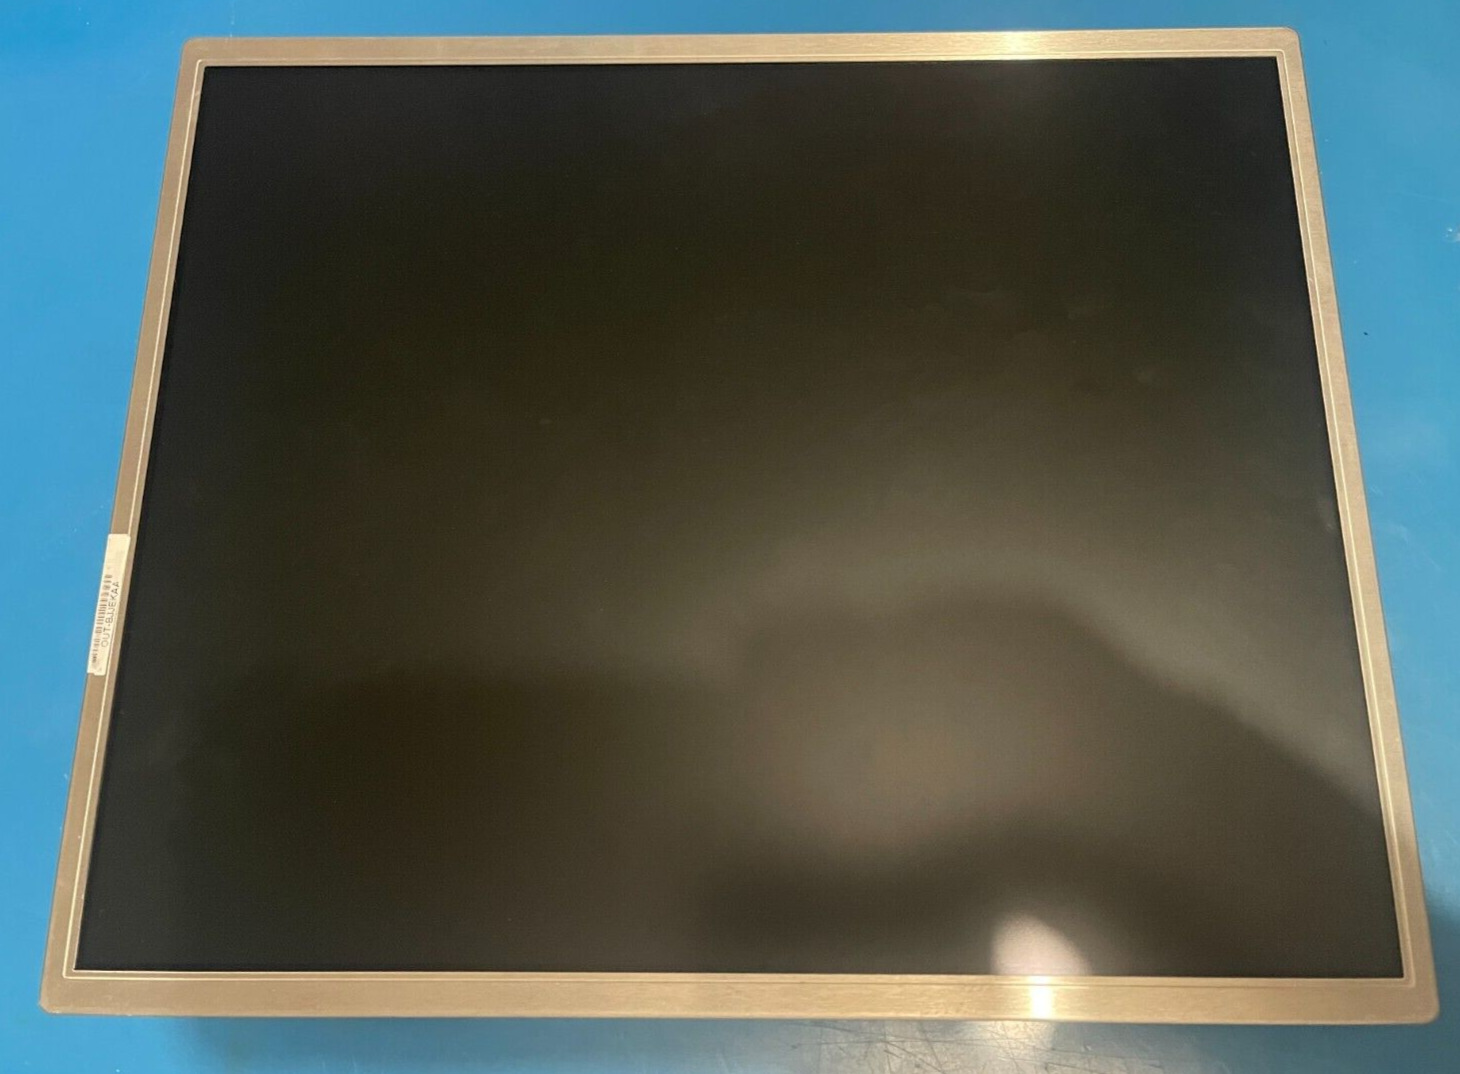 CHI MEI M170XW01 V1 17 INCH INDUSTRIAL LCD PANEL 1280X768